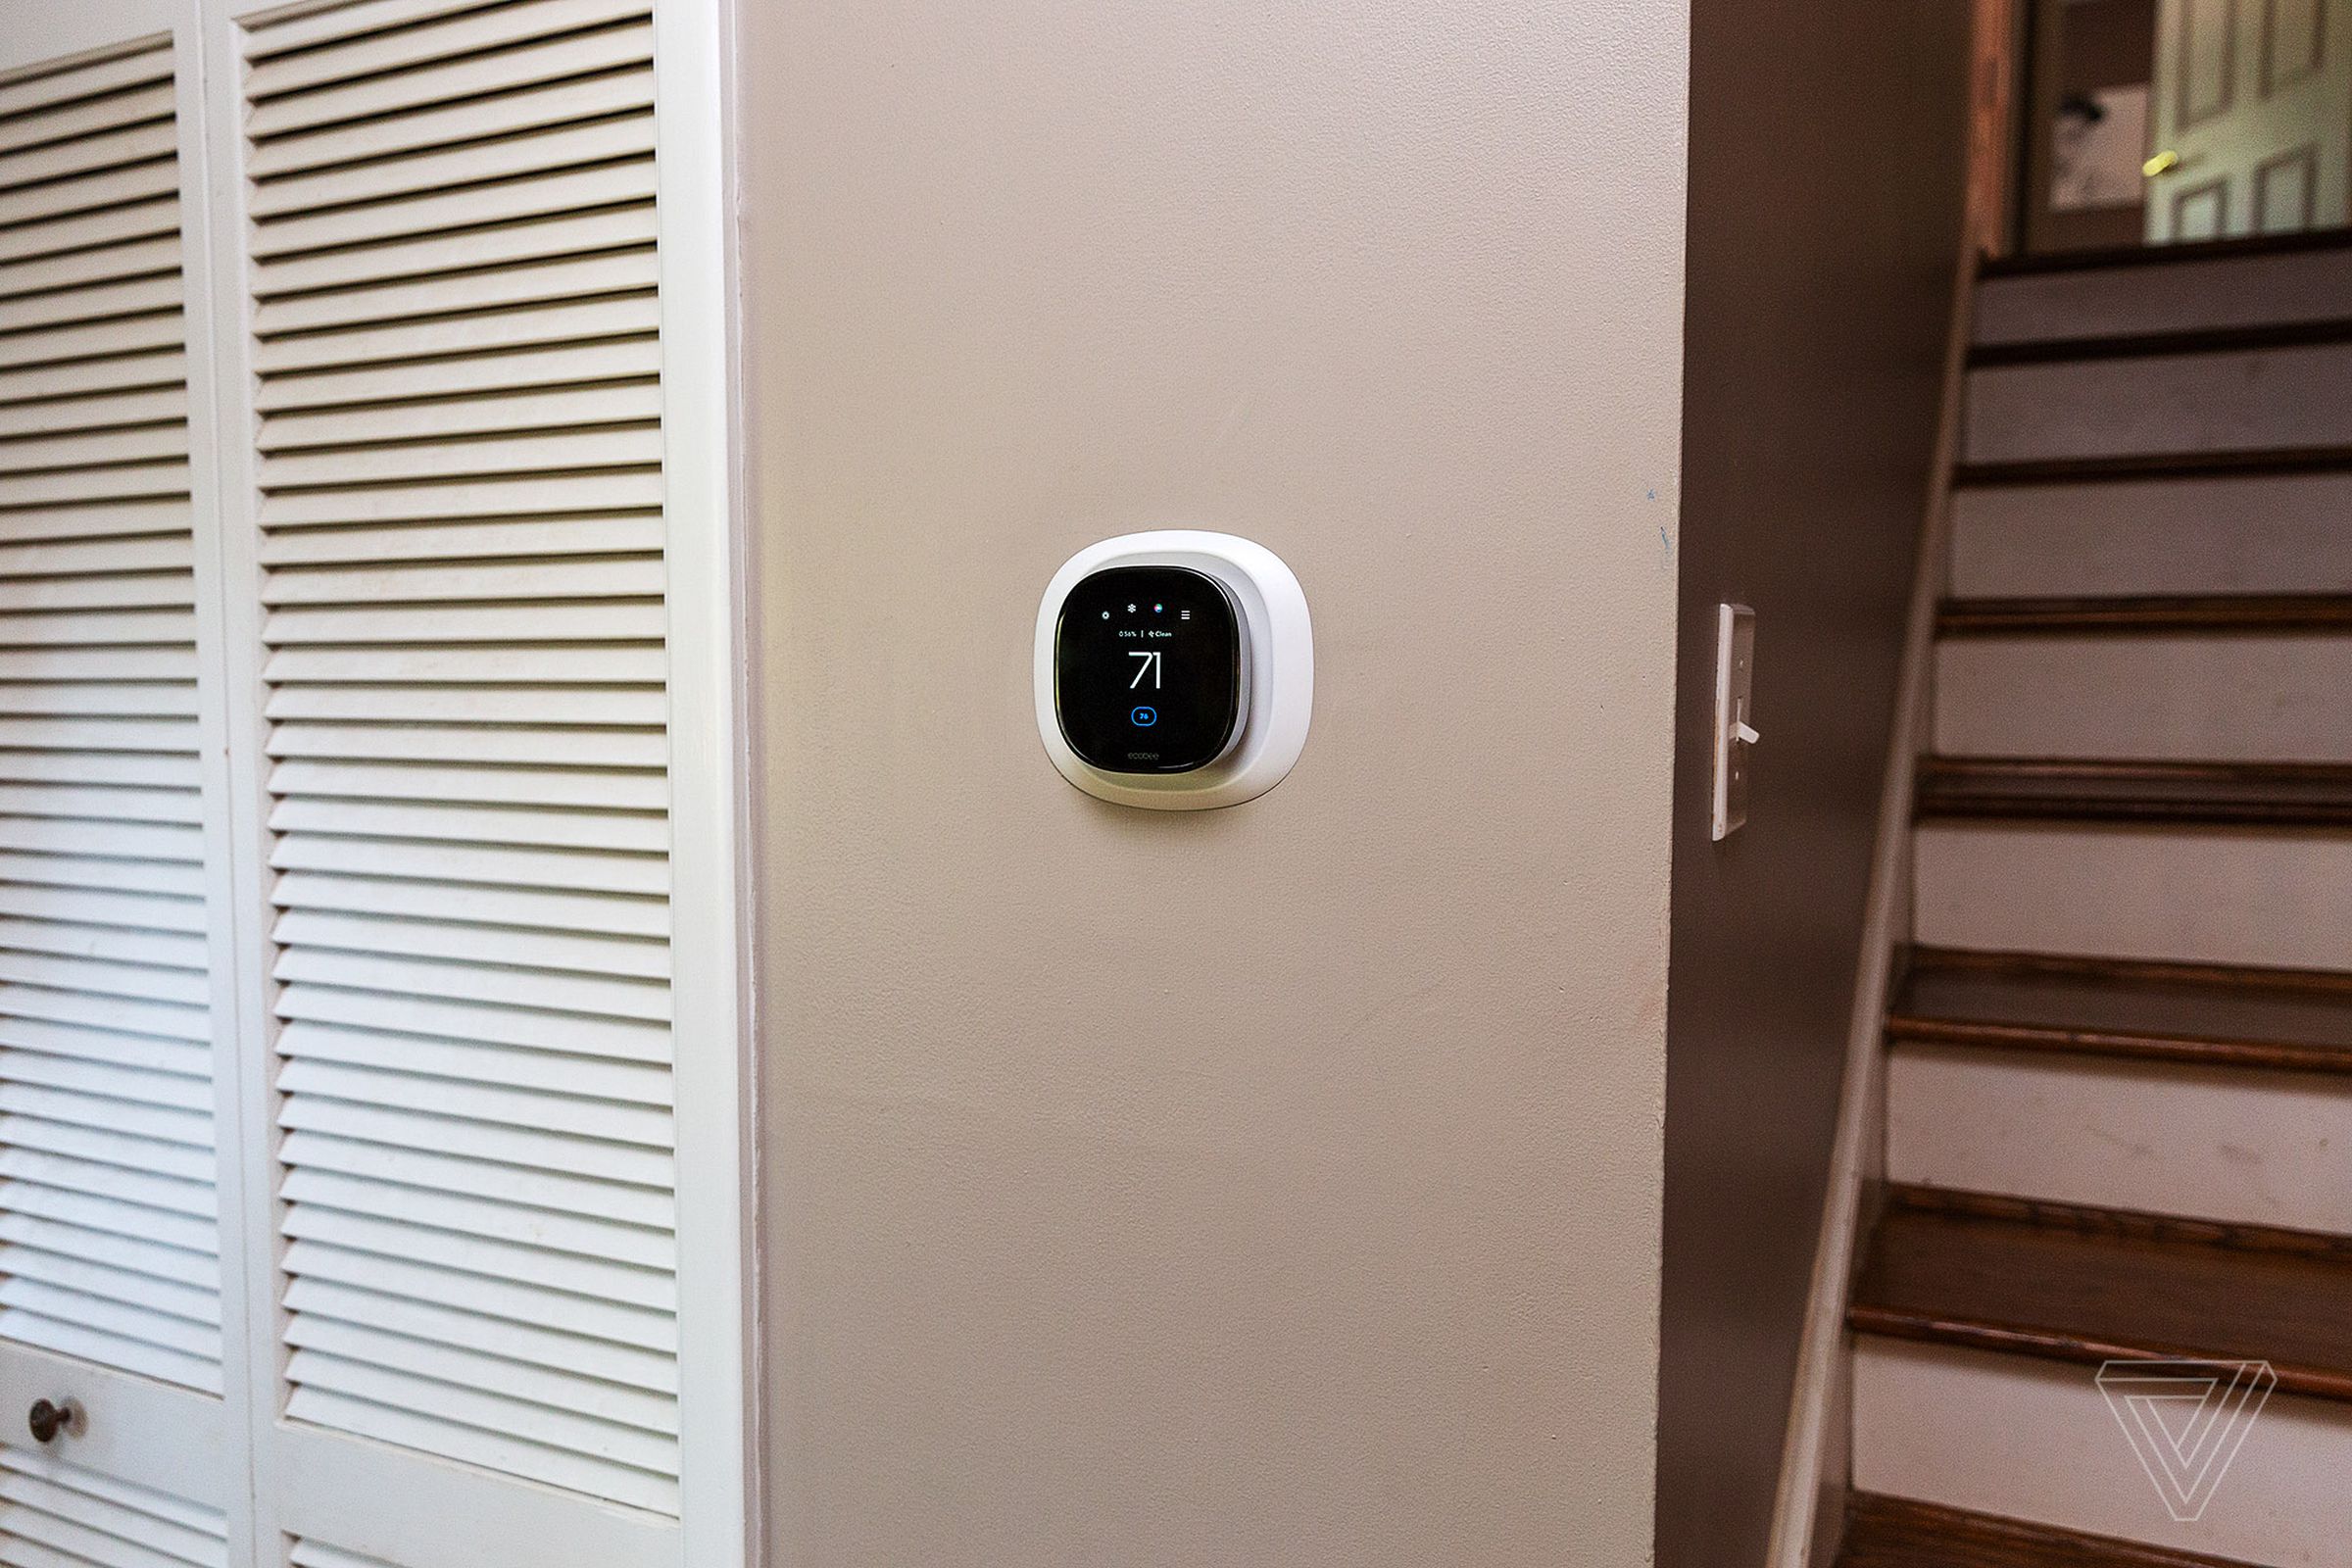 Small Ecobee thermostat on a tan wall in between closet and staircase.